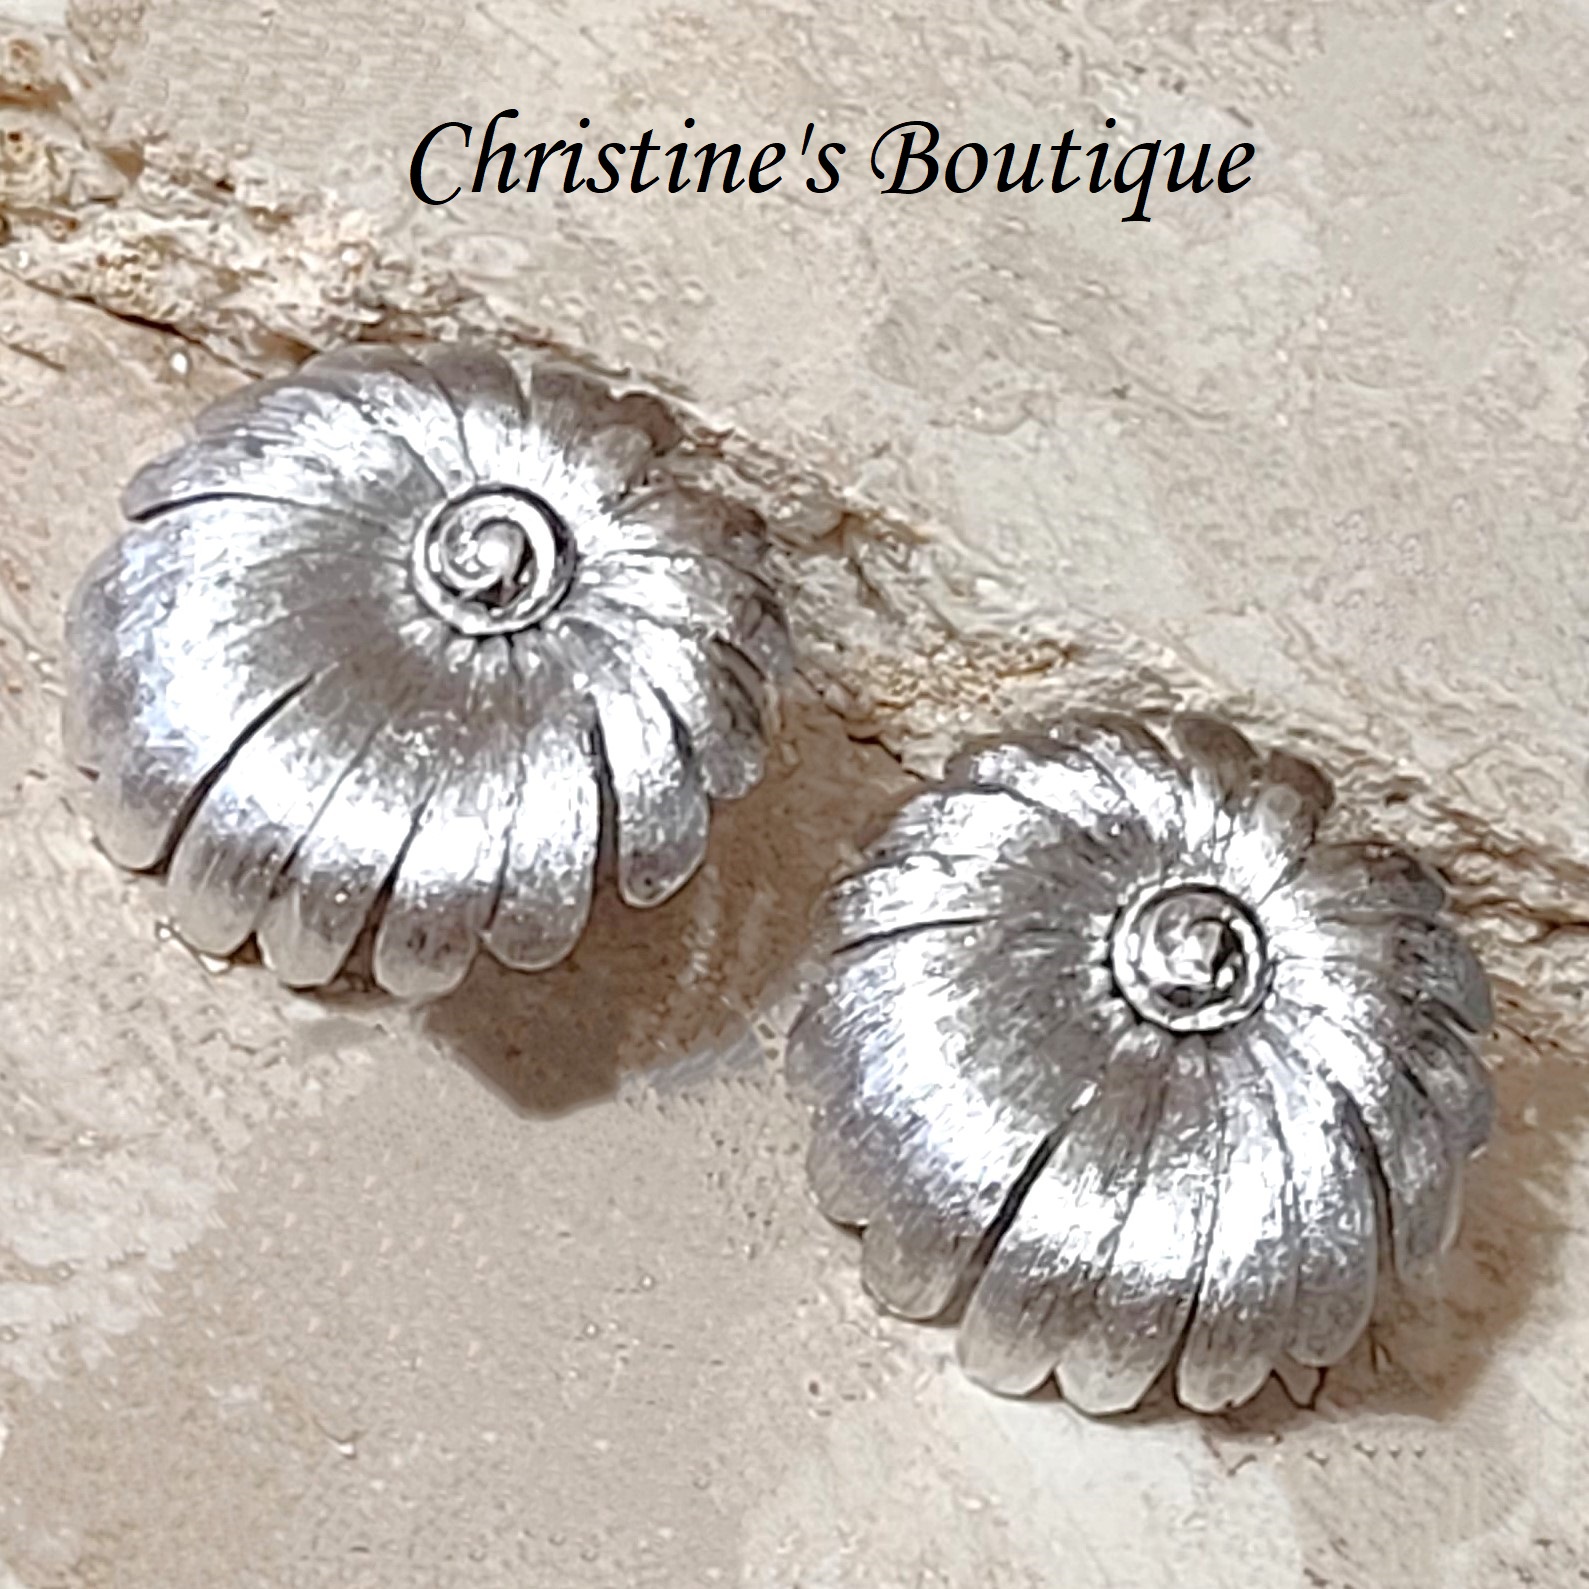 Monet clipon earrings, silvertone flowers, button style vintage earrings - Click Image to Close